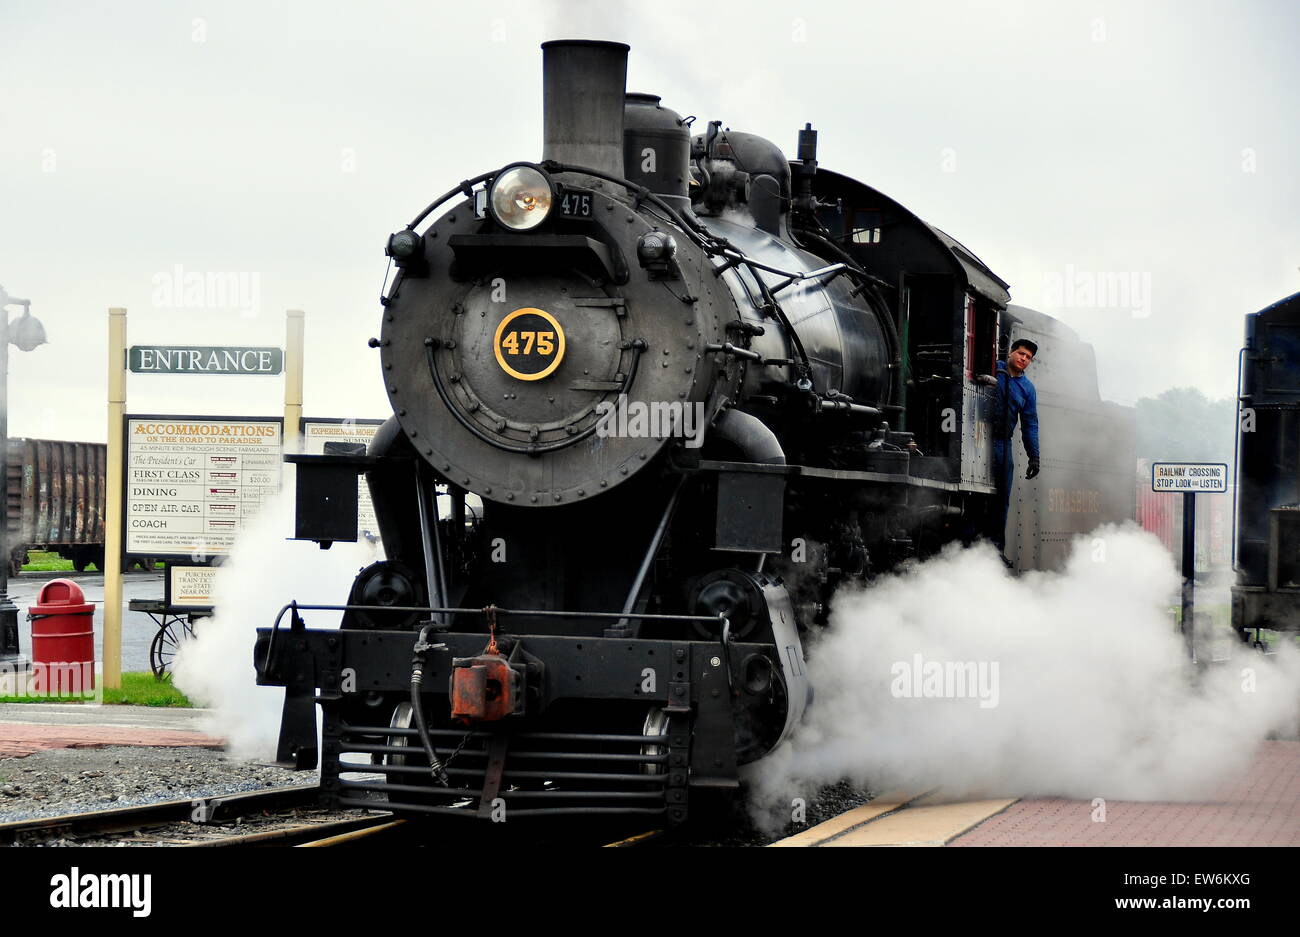 Strasburg, Pennsylvania:  A vintage steam locomotive with its engineer pulling into the Strasburg Railroad station  * Stock Photo